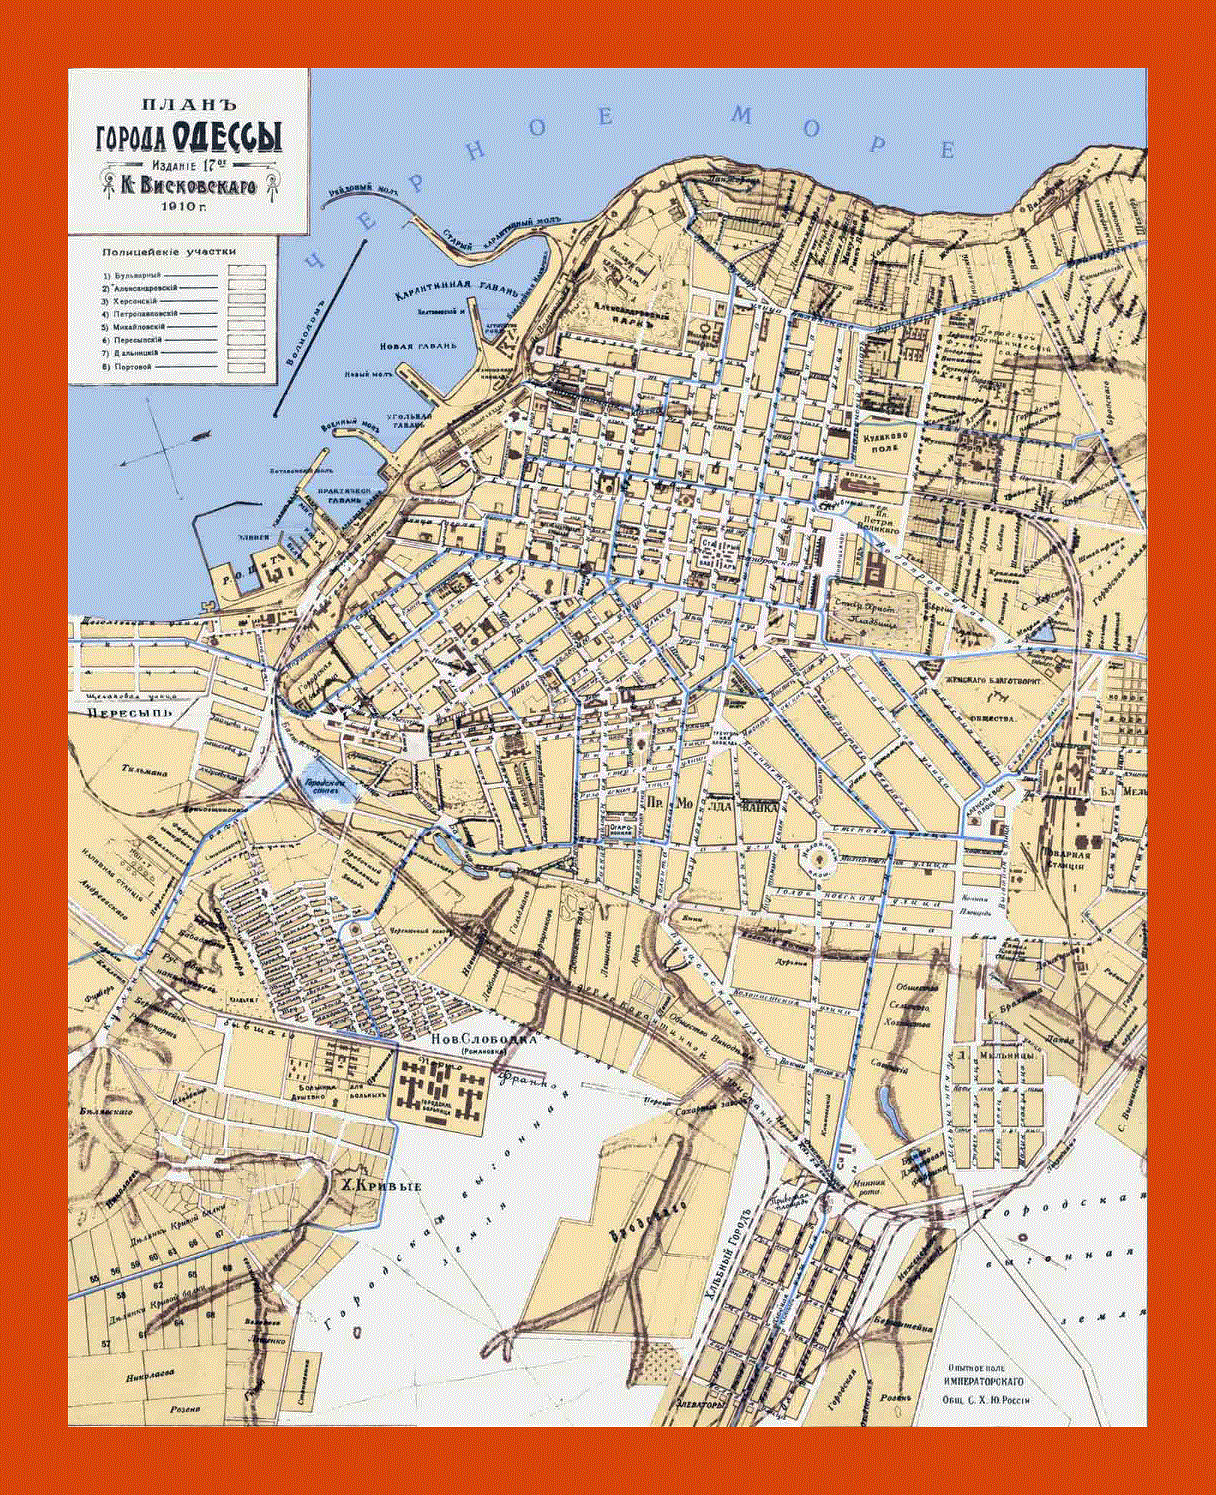 Old map of Odessa city - 1910